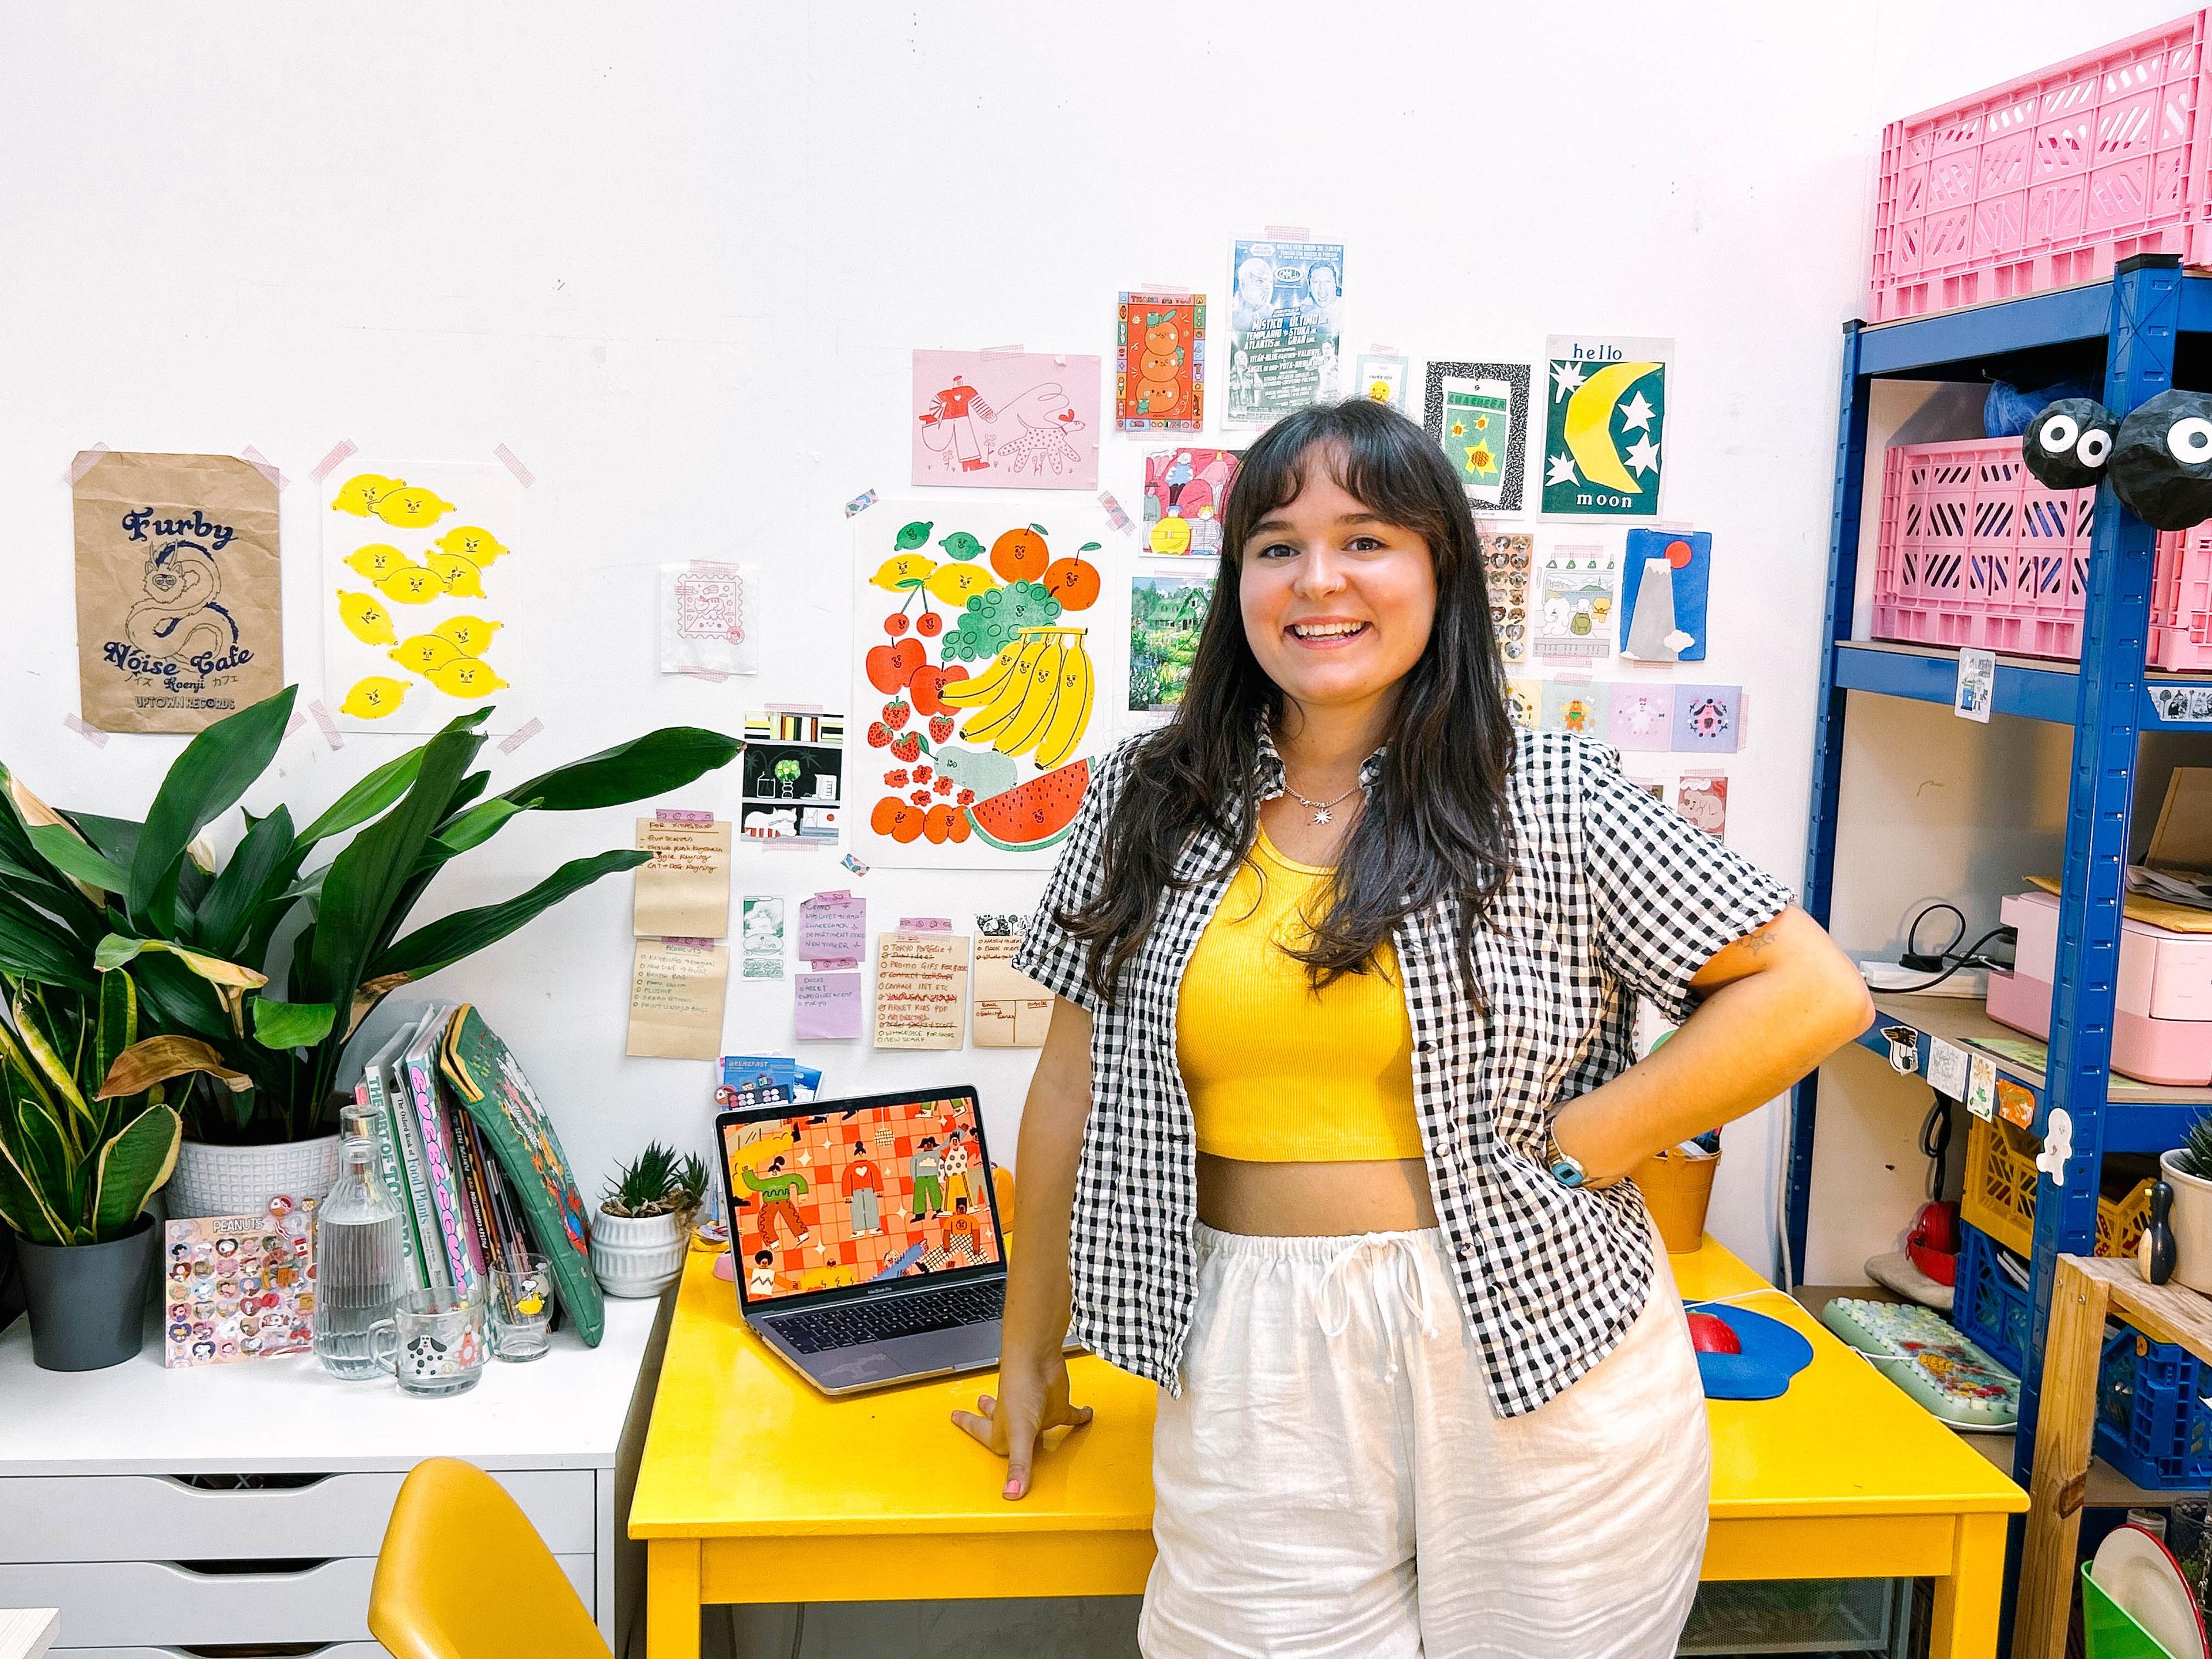 A person in a colourful studio space leaning on a desk looking ahead smiling. There are artworks stuck on the wall.